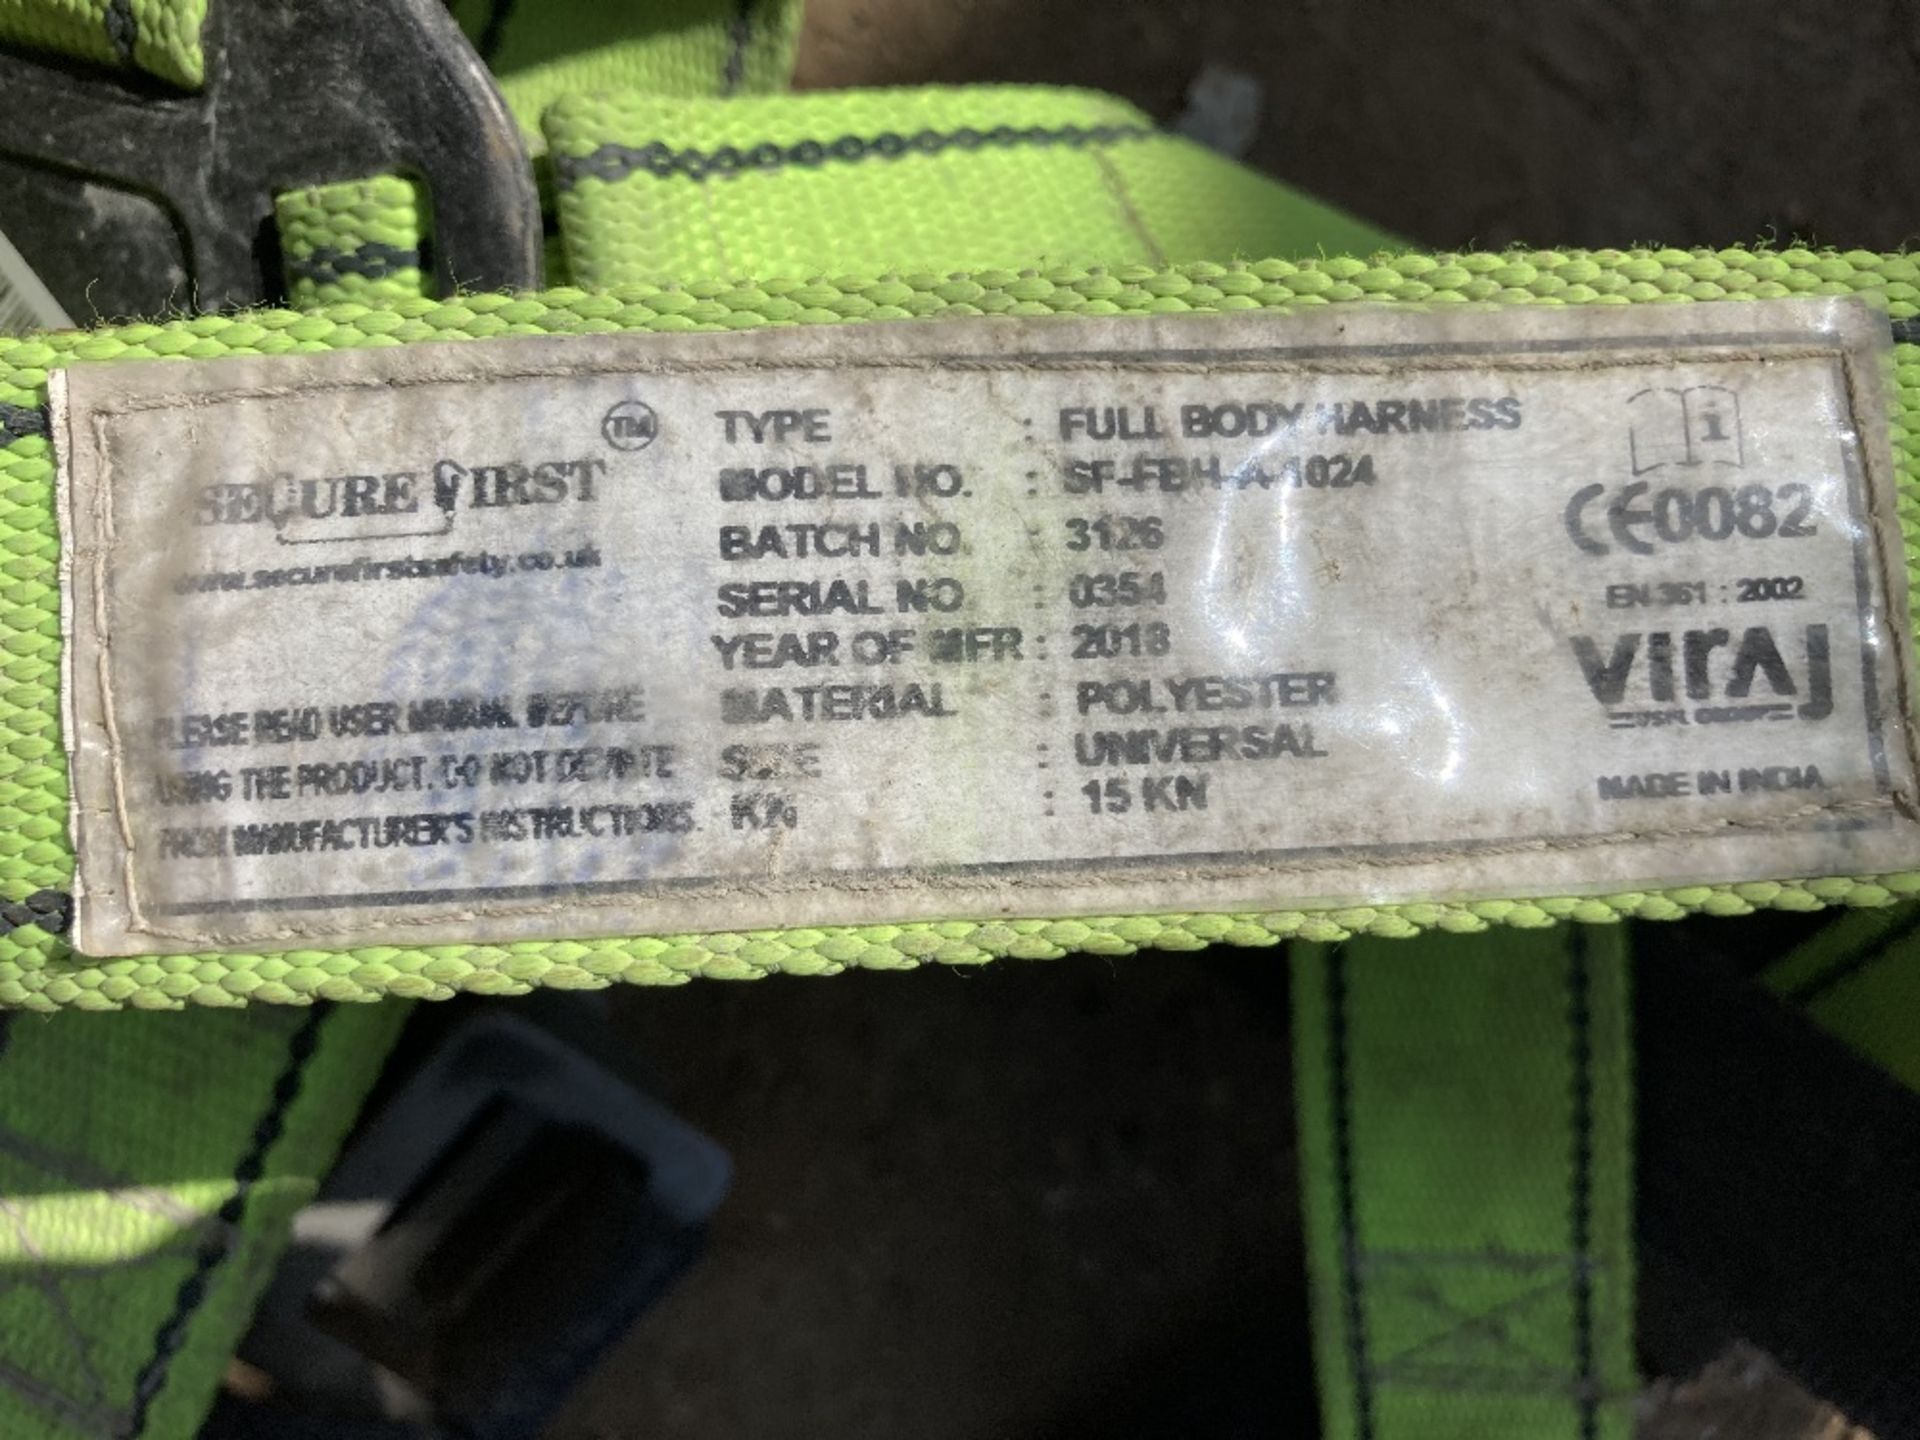 2018 Secure First SF-FBH-A-1024 Safety Harness - Image 2 of 3